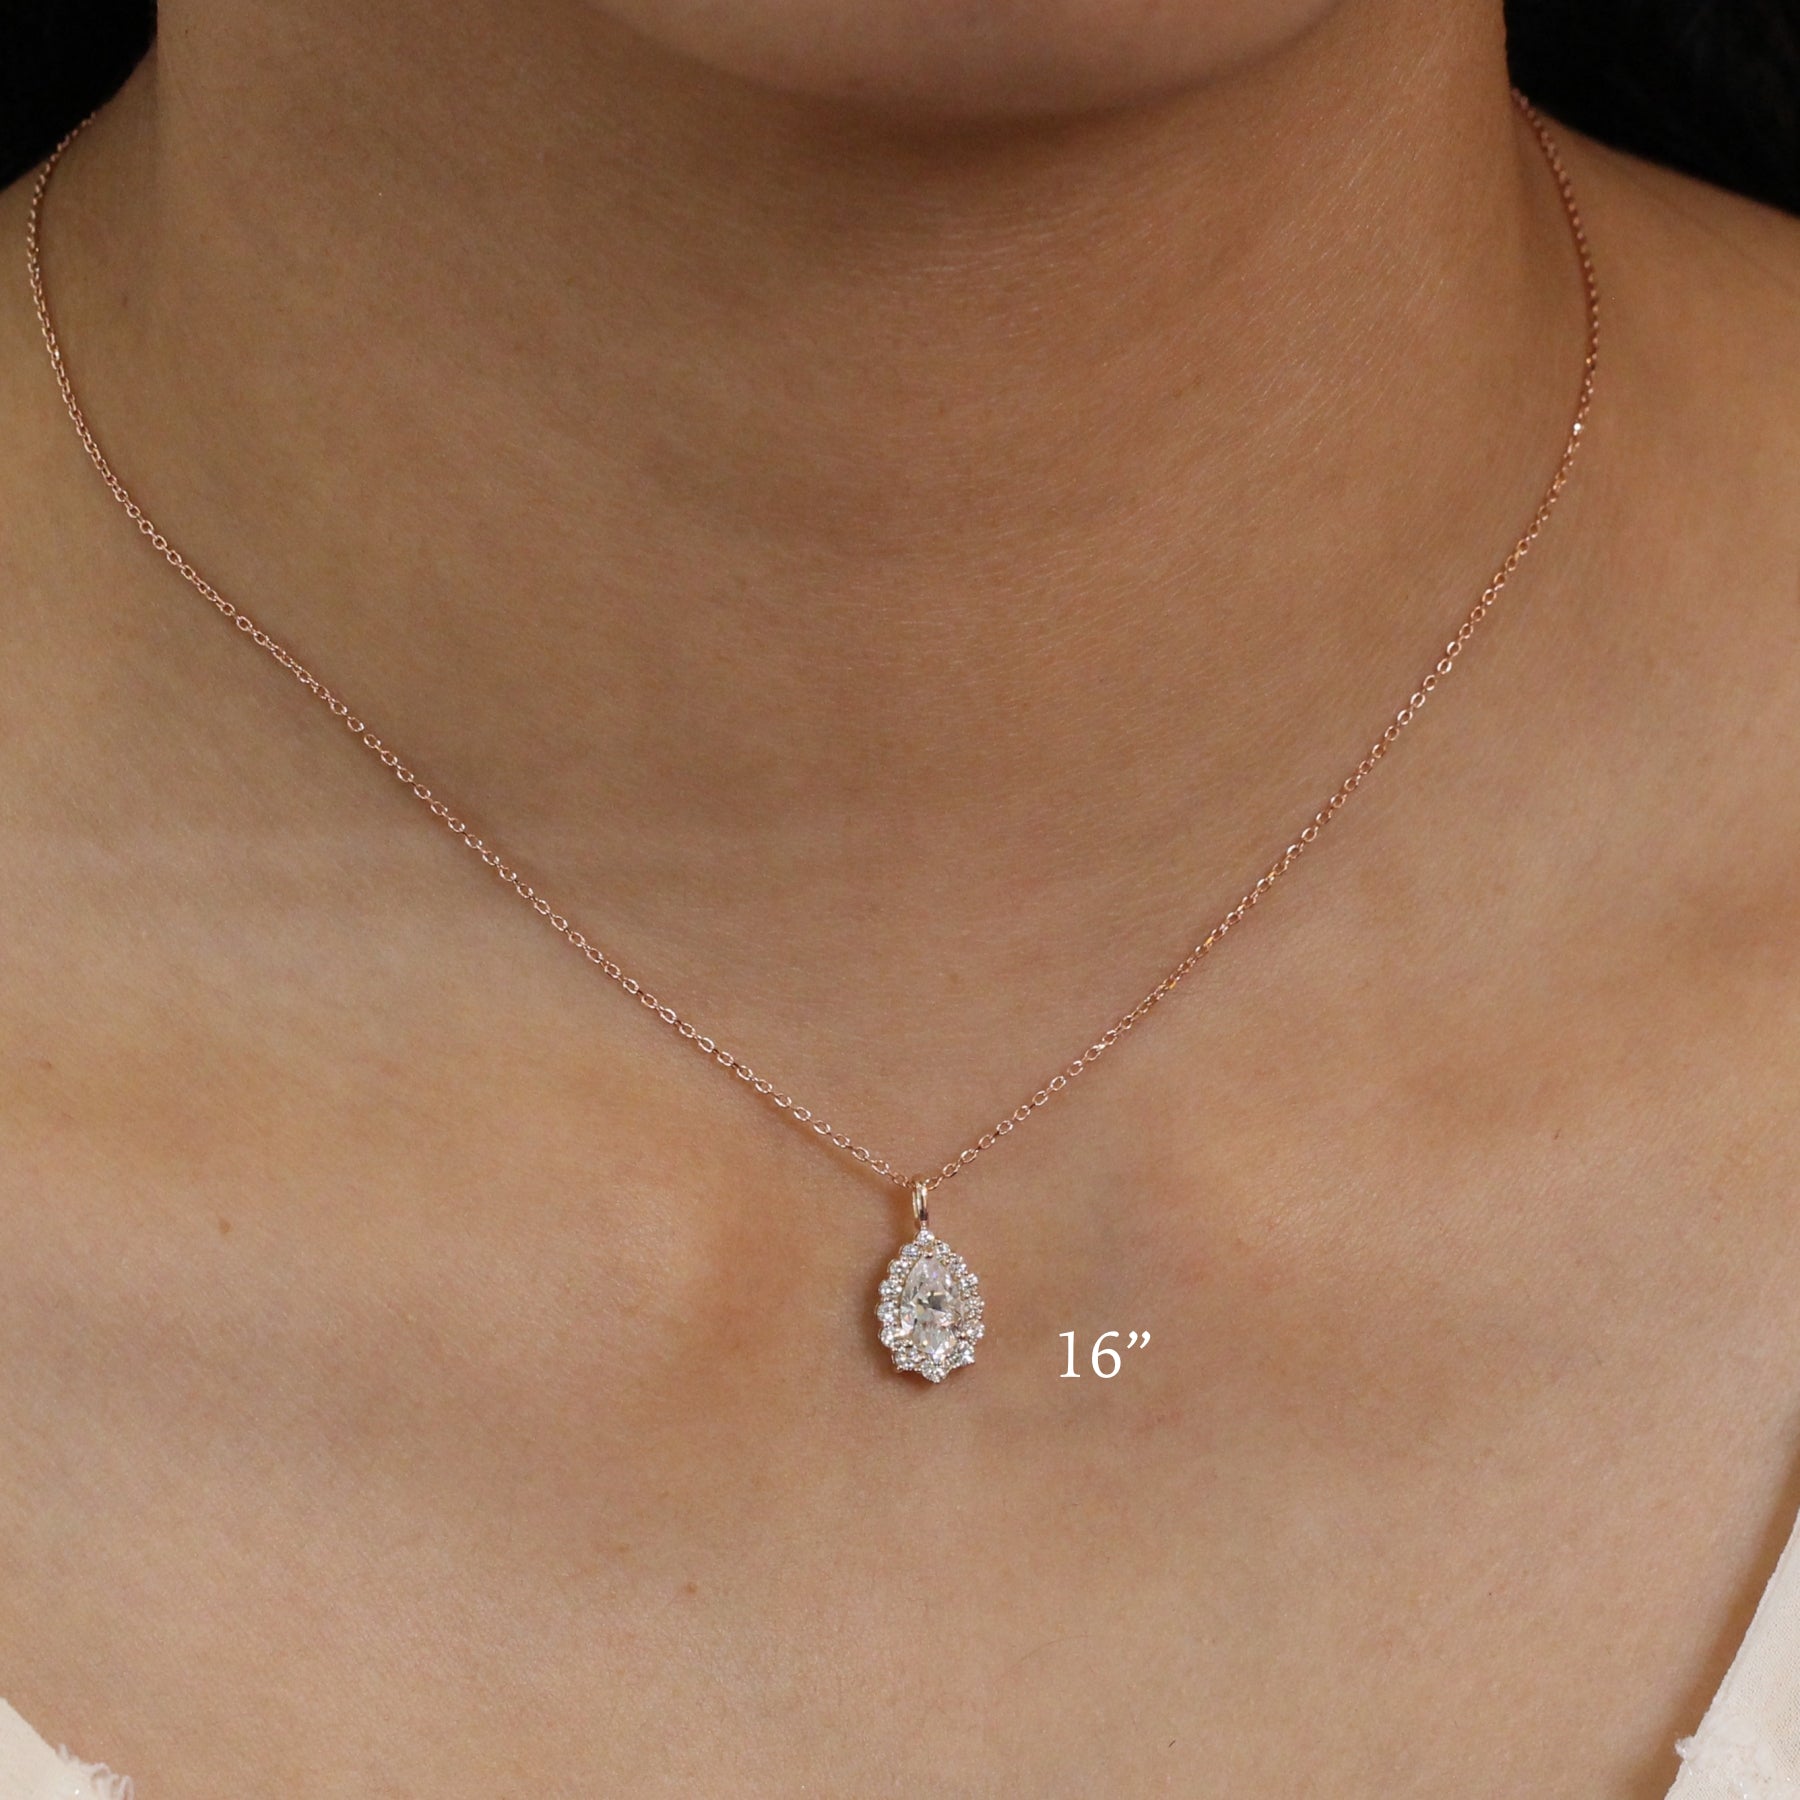 Halo Diamond Necklace Rose Gold Oval Moissanite Pendant Layering Chain 14K White Gold - Made to Order